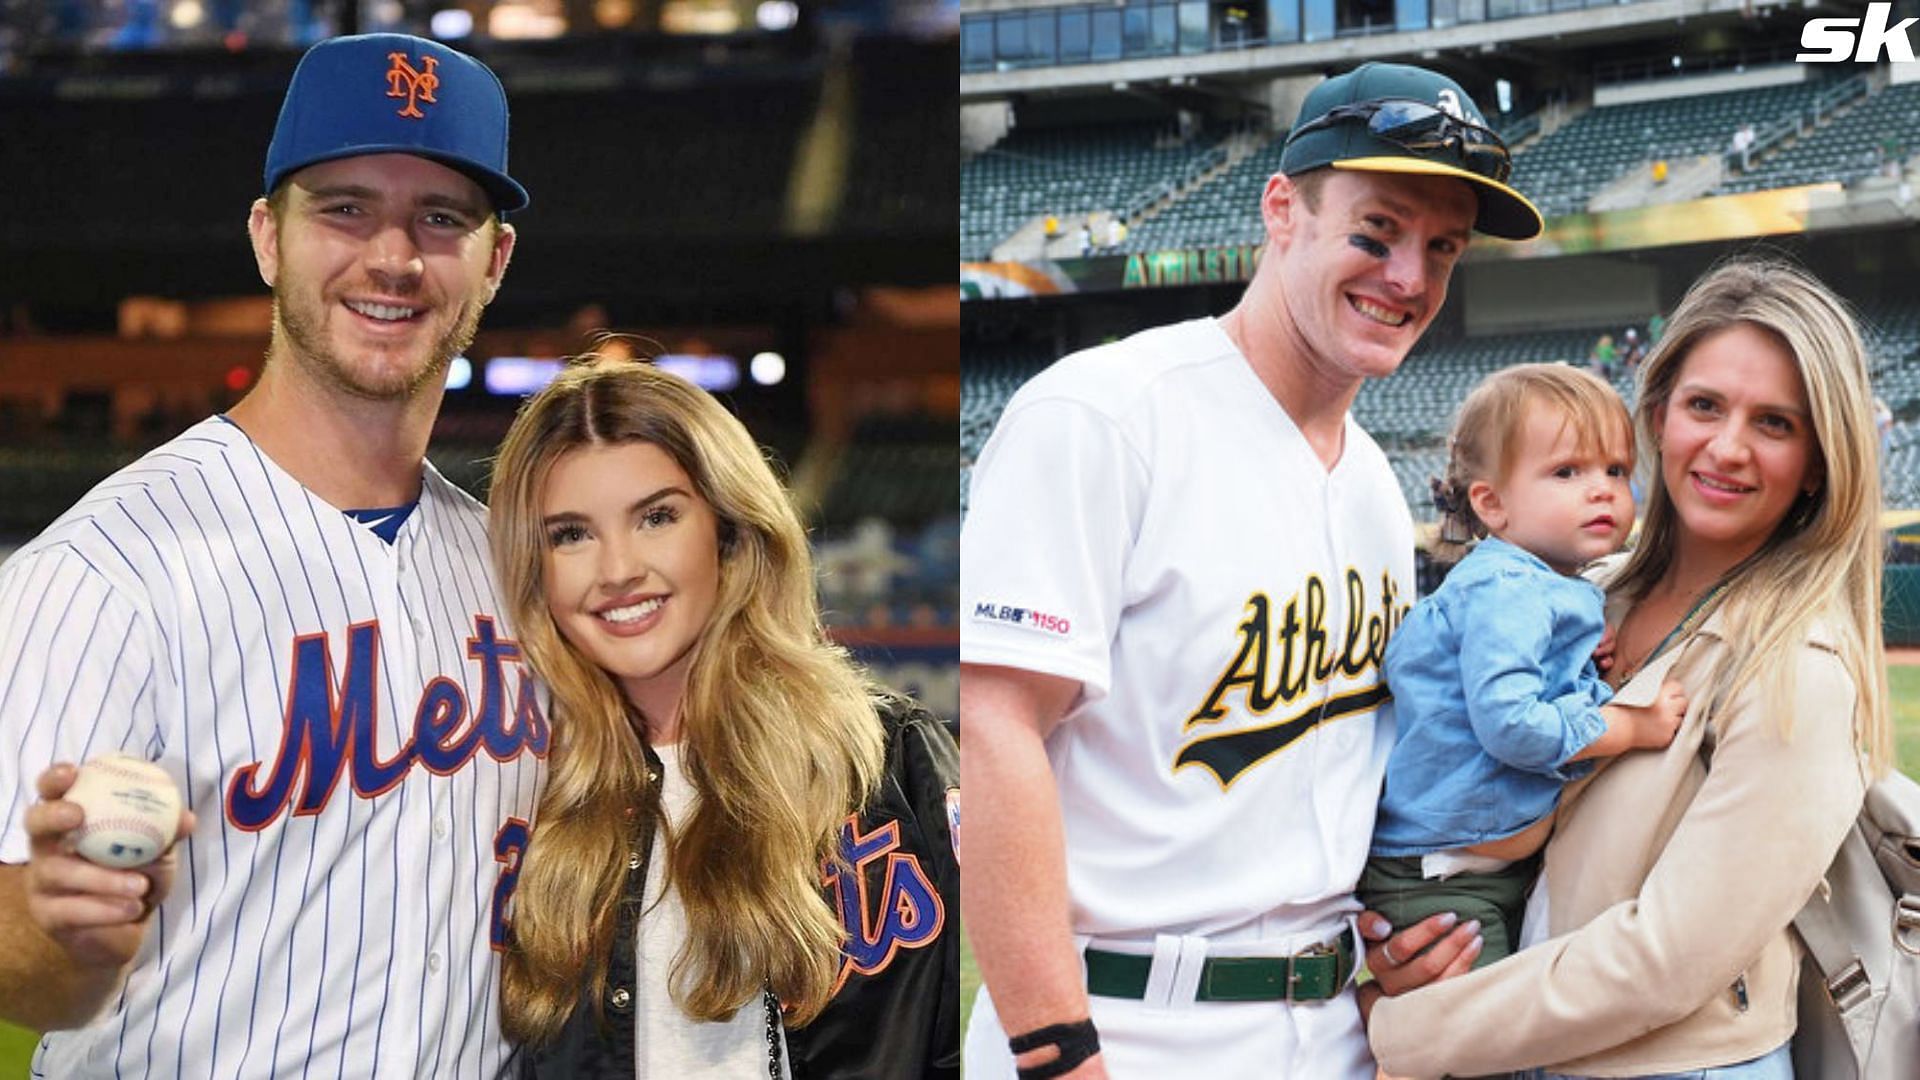 Pete Alonso: Pete Alonso's wife Haley bonds with Marc Canha's wife